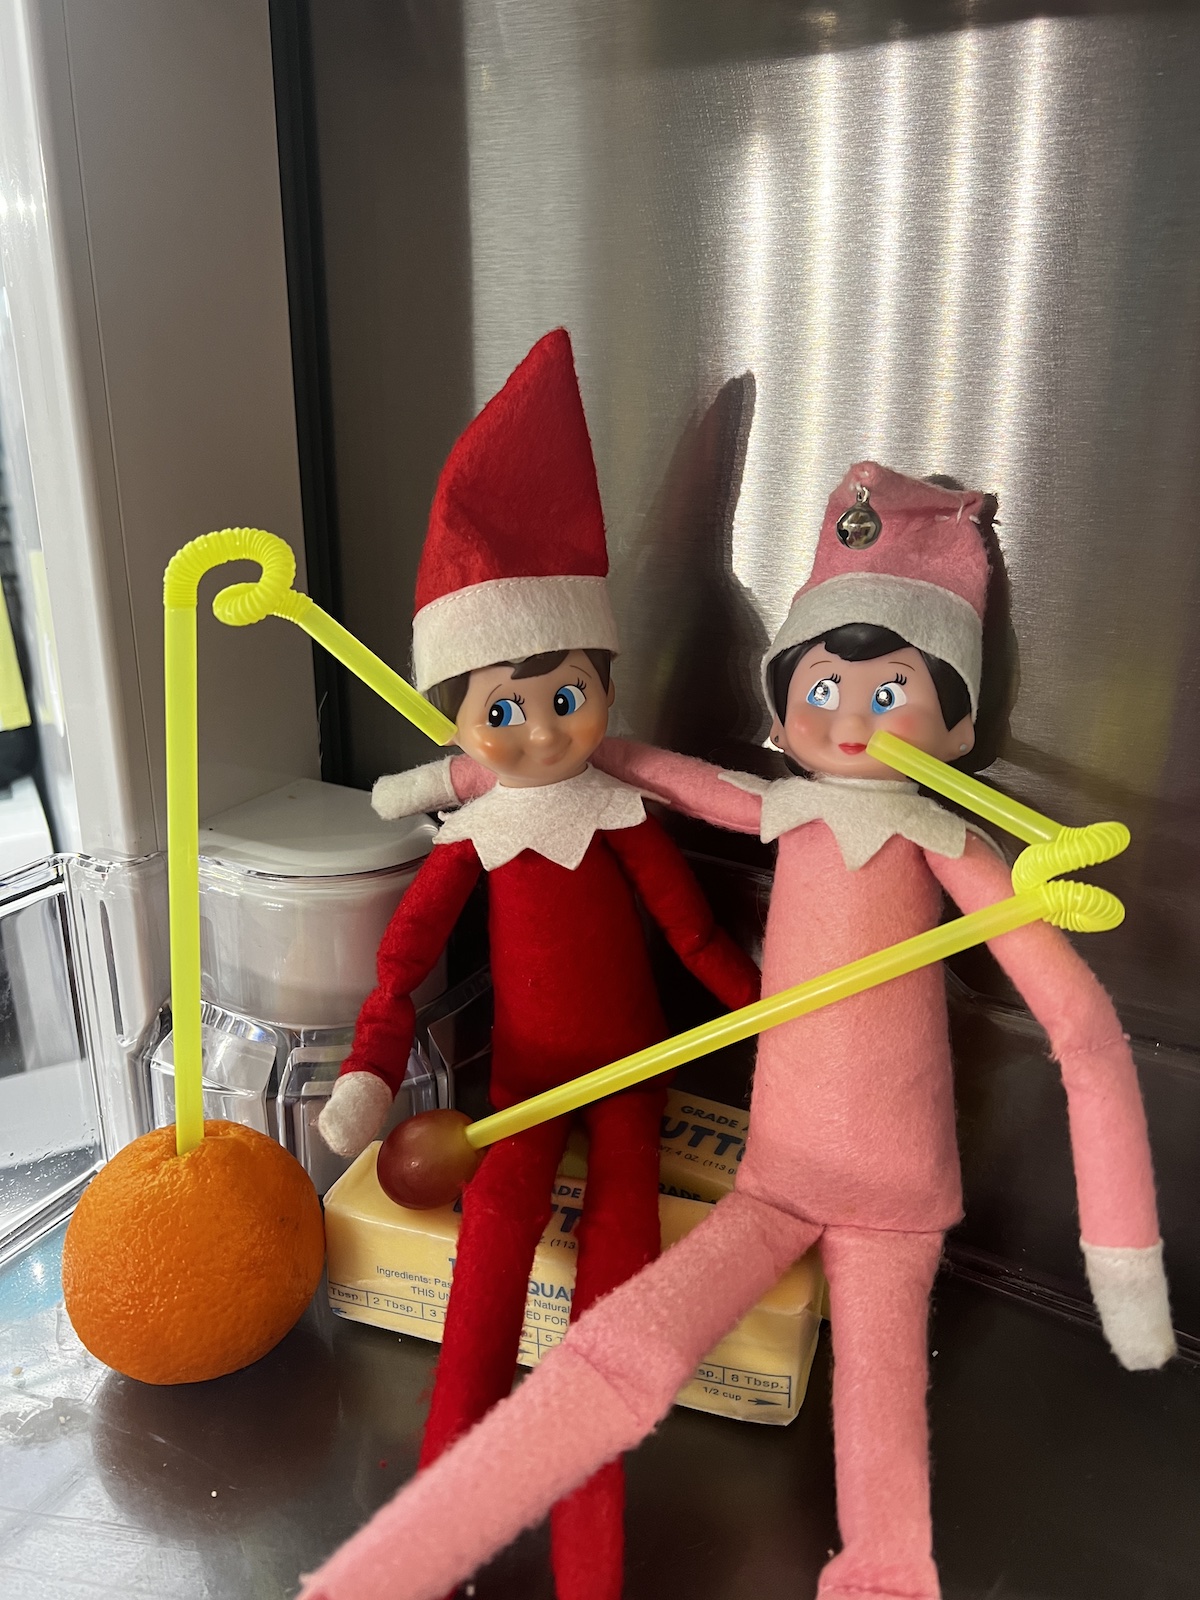 Last Minute Elf on the Shelf Ideas to help save your sanity during the busy holiday season with super easy elf on the shelf inspiration!